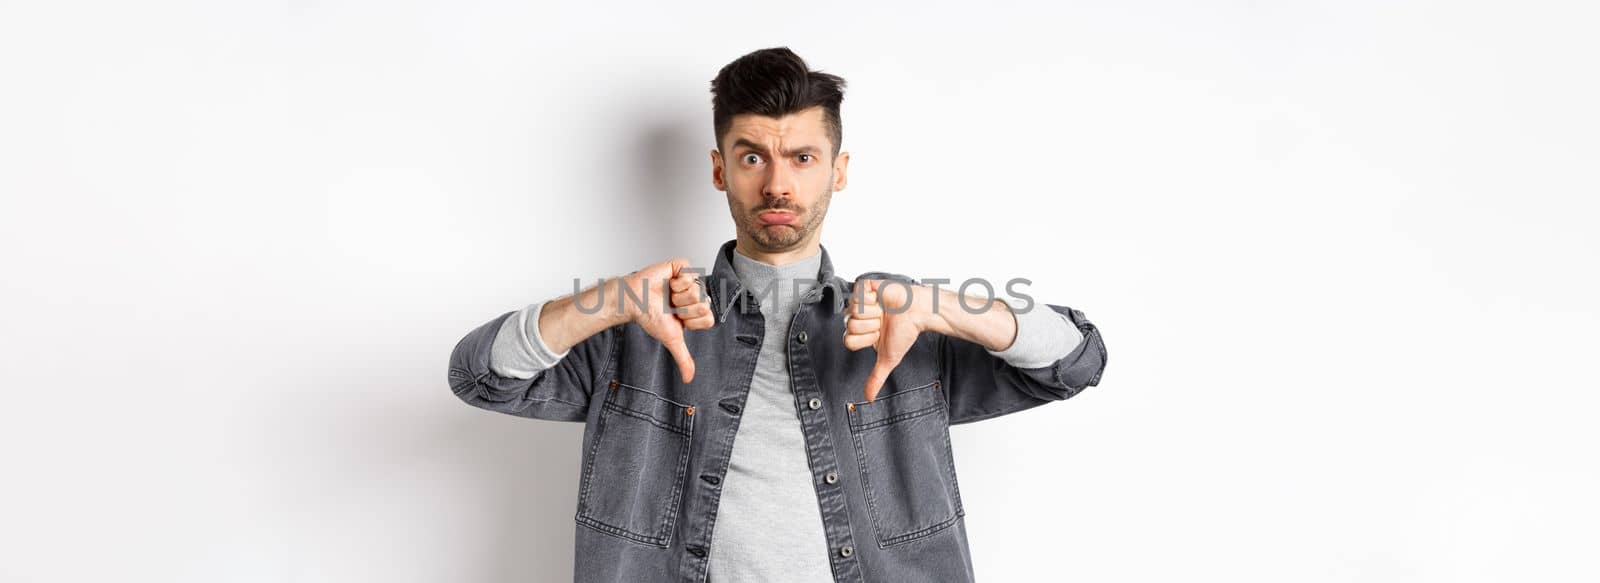 Disappointed funny man frowning and looking upset, showing thumbs down displeased, standing on white background.